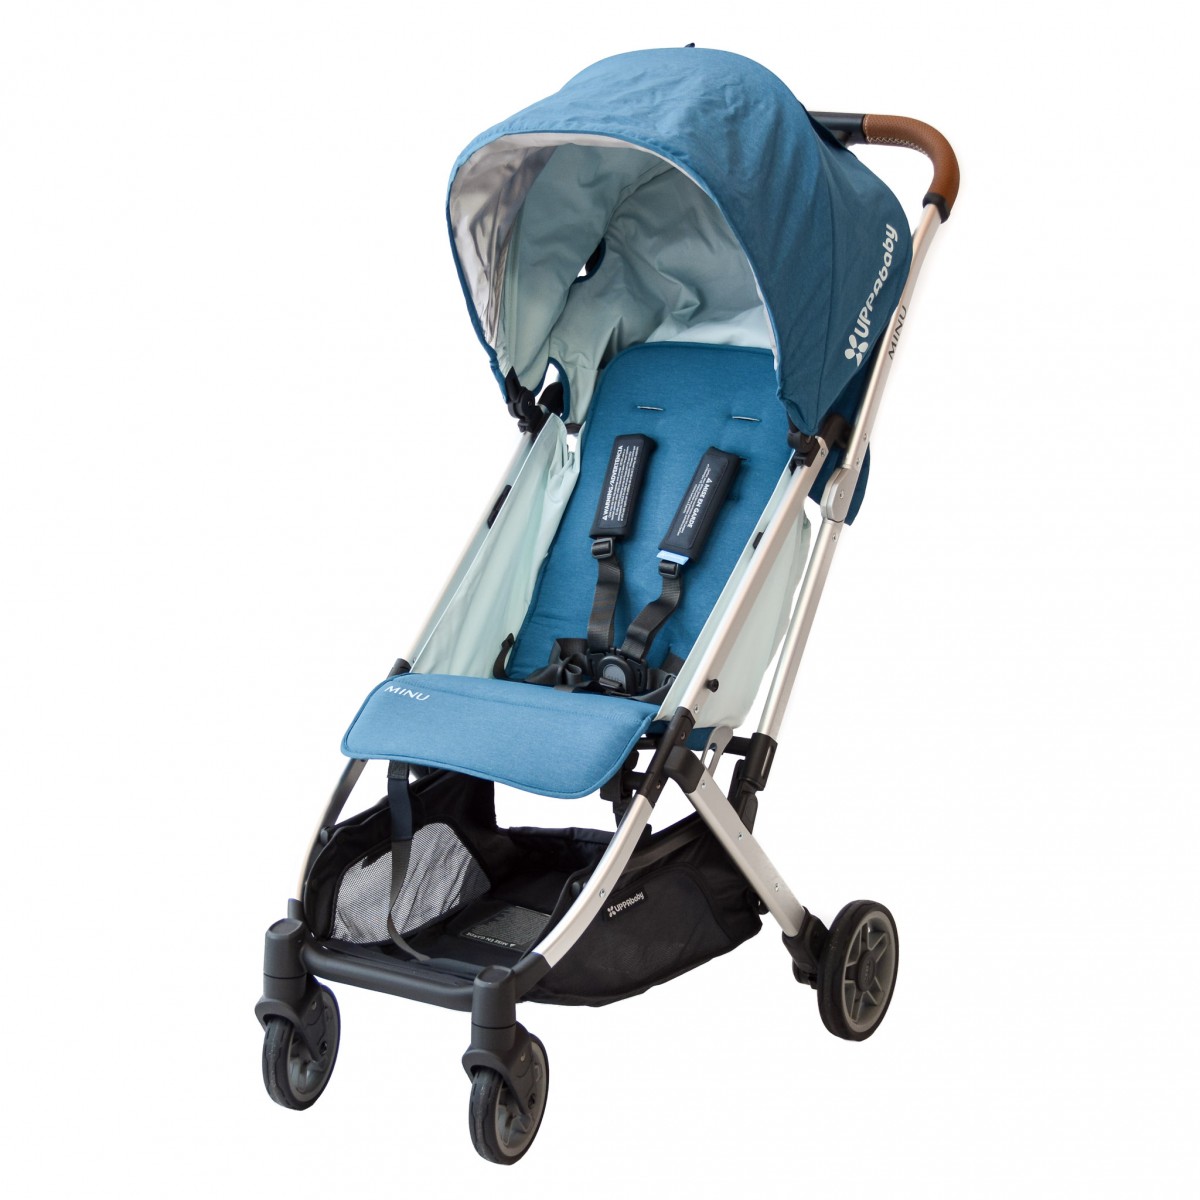 UPPAbaby Minu Review